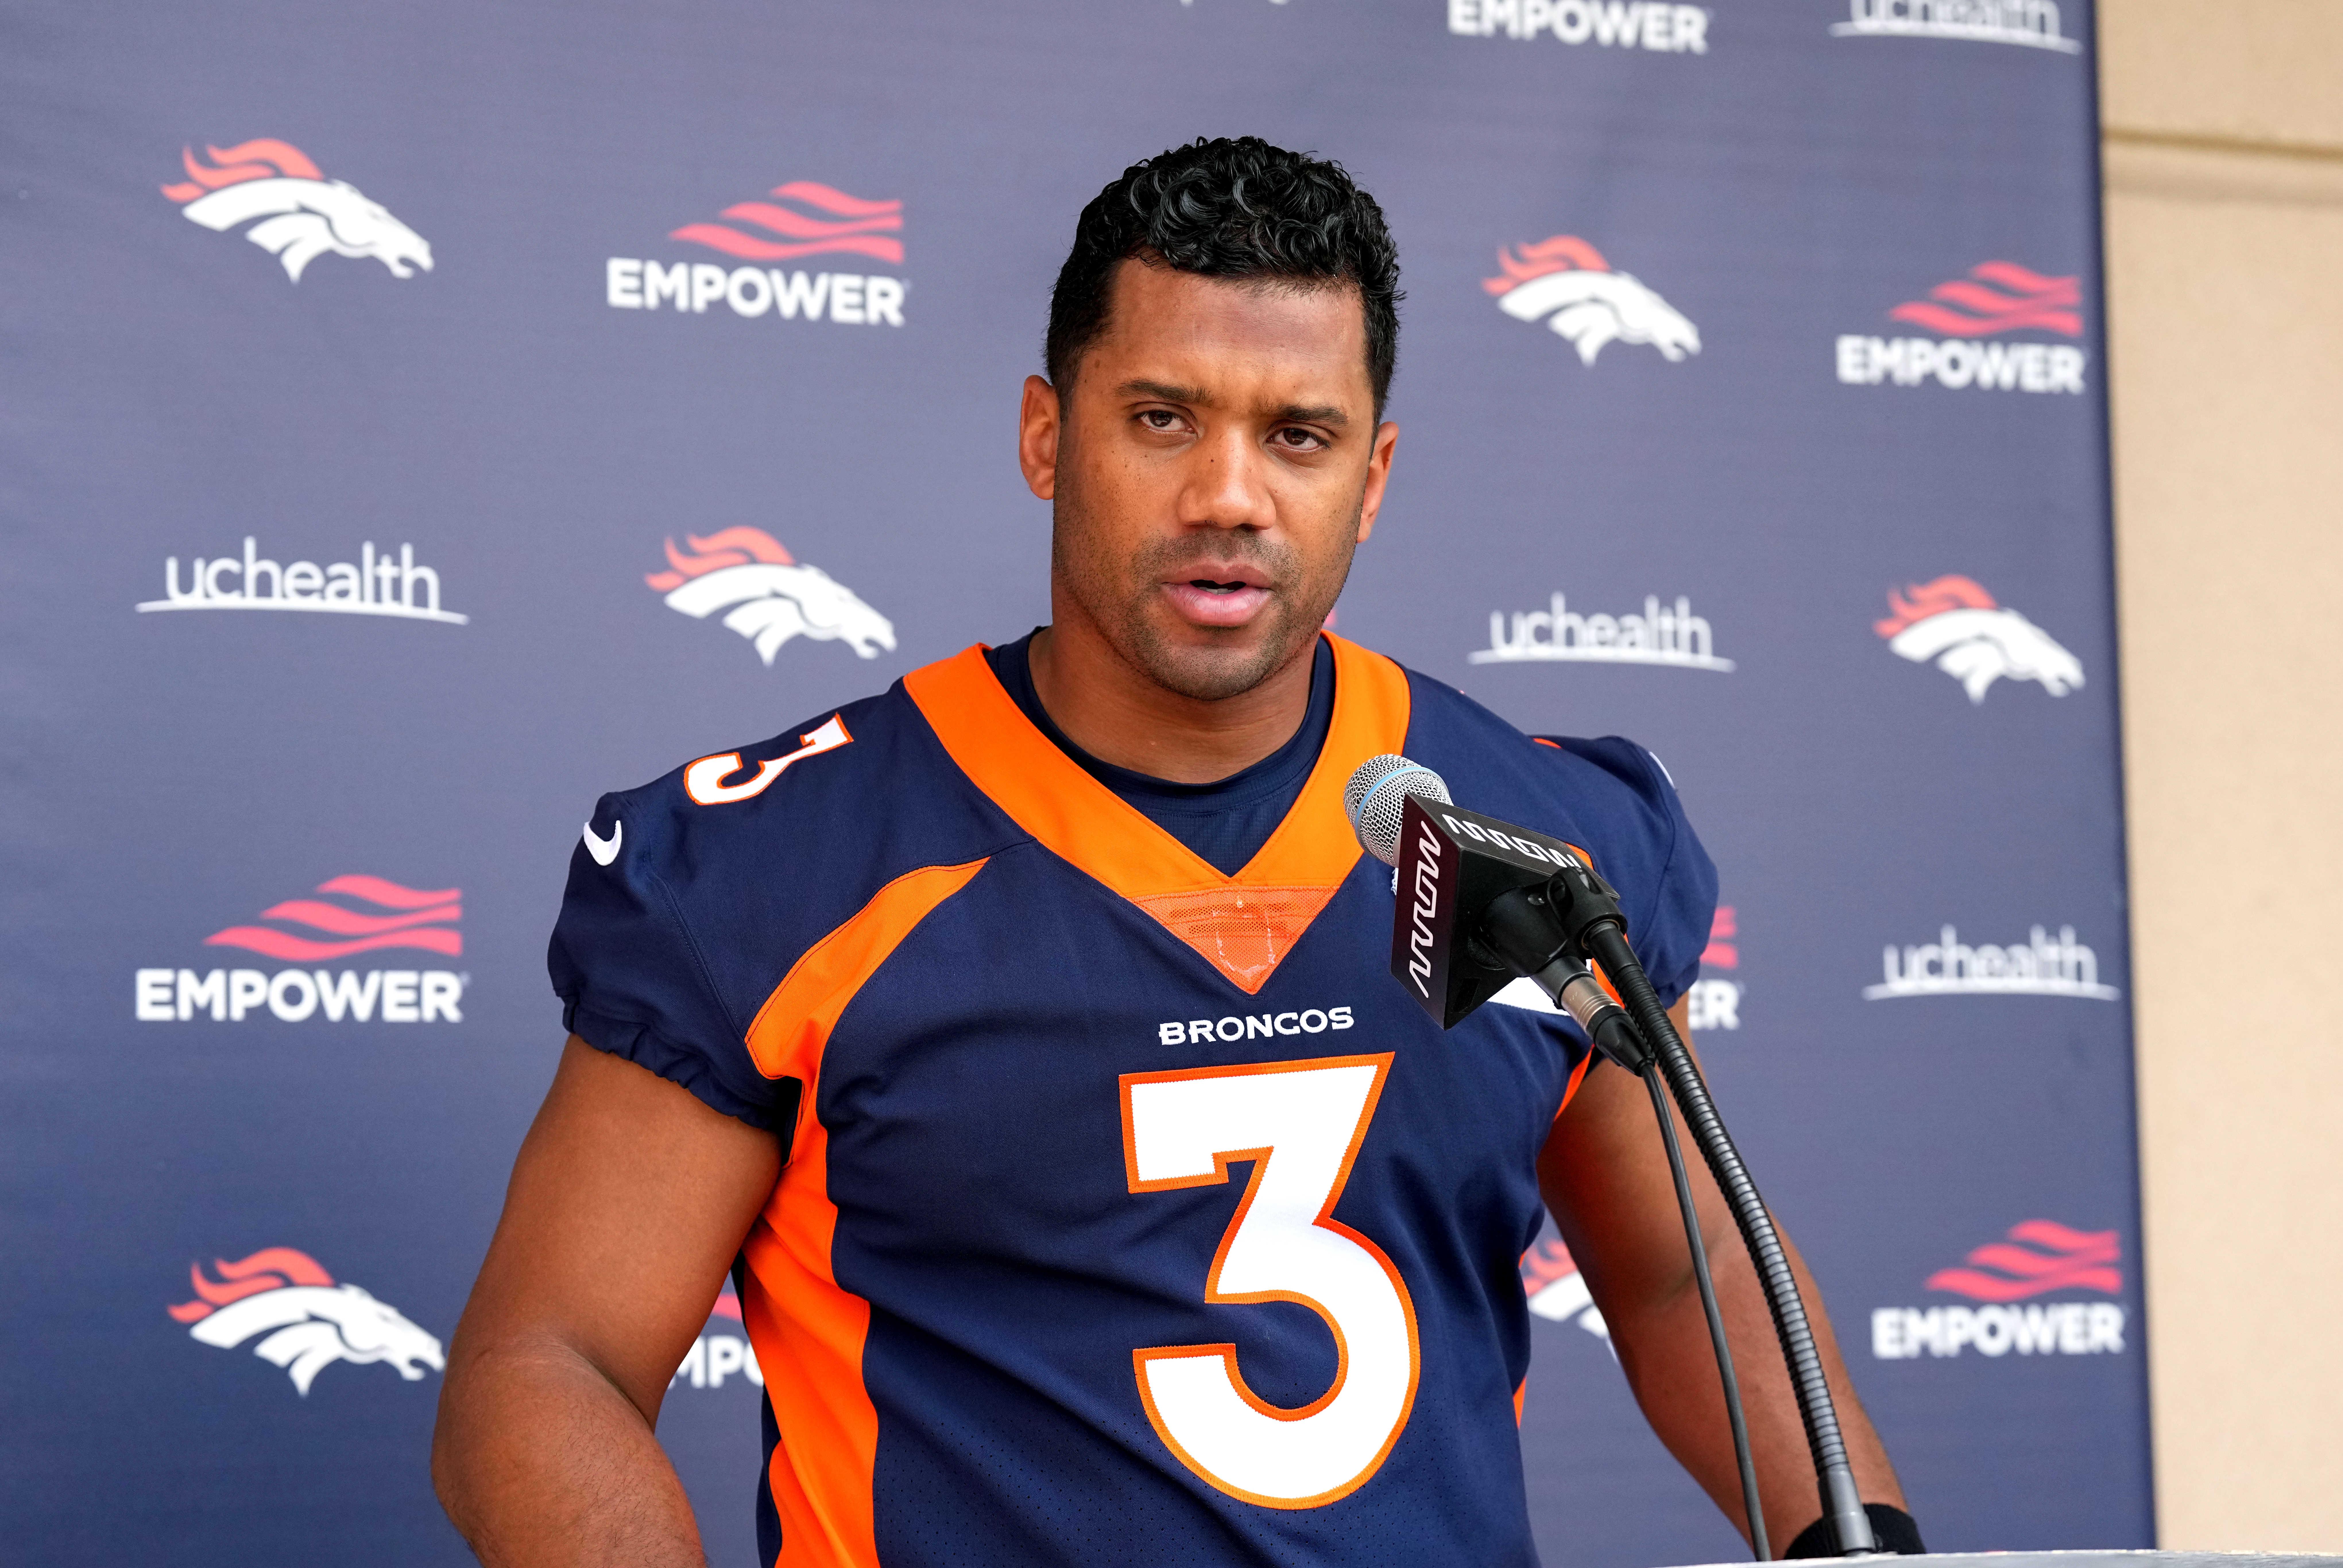 Broncos News: Russell Wilson Has Sky-High Asking Price for Next Contract Extension